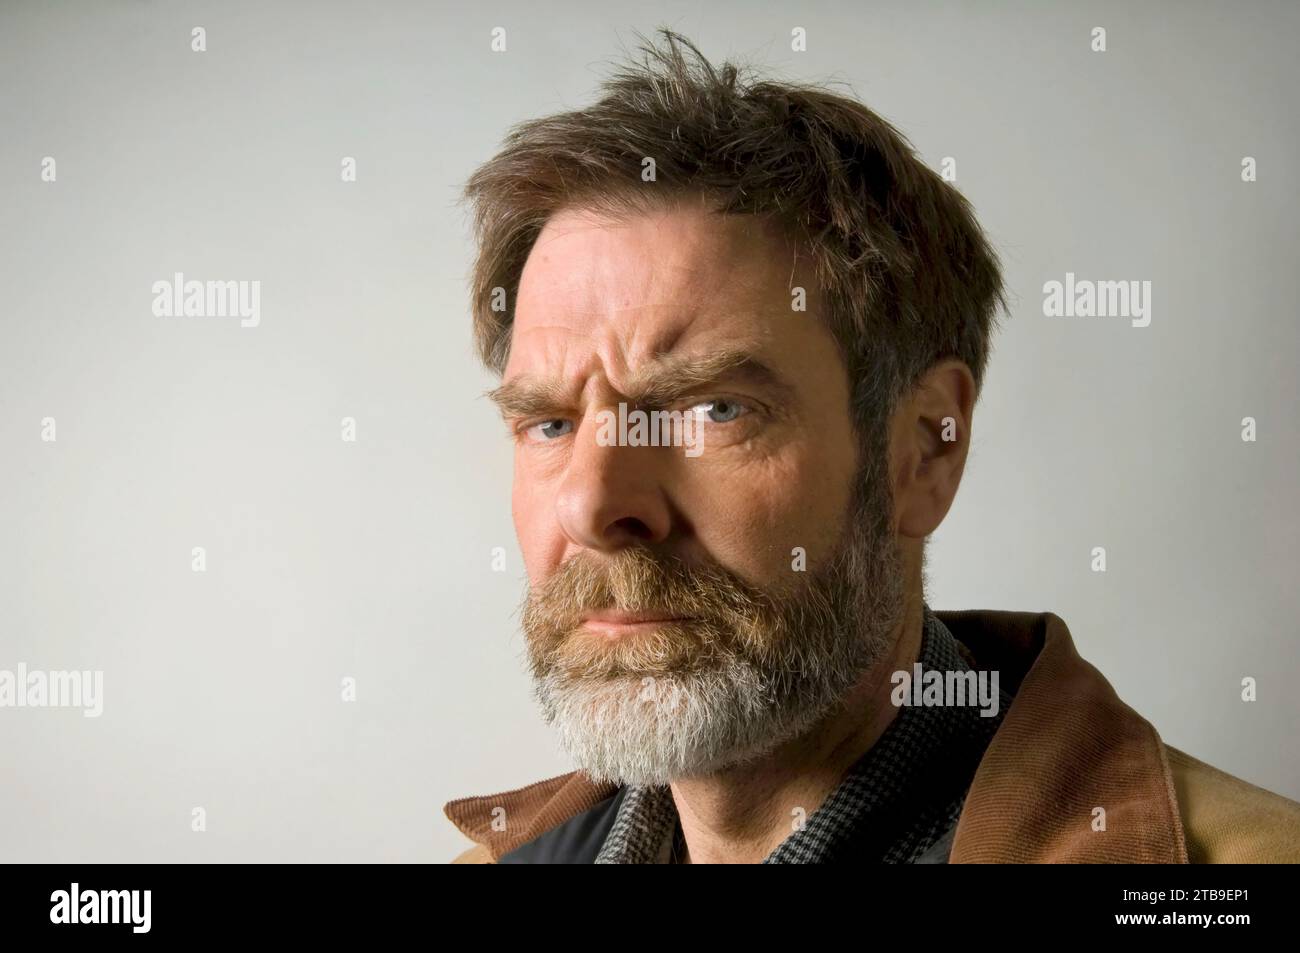 Studio portrait of a mature man with a wrinkled brow; Studio Stock Photo